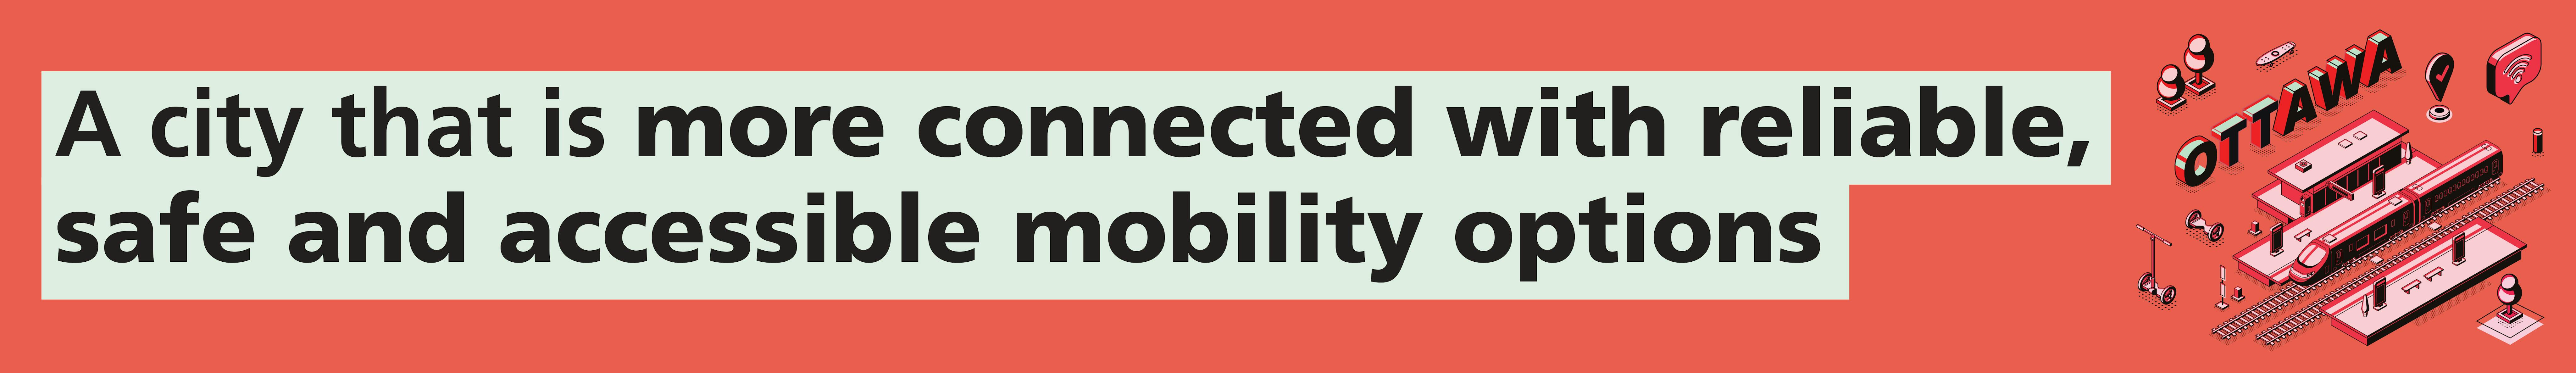 A city that is more connected with reliable, safe and accessible mobility options